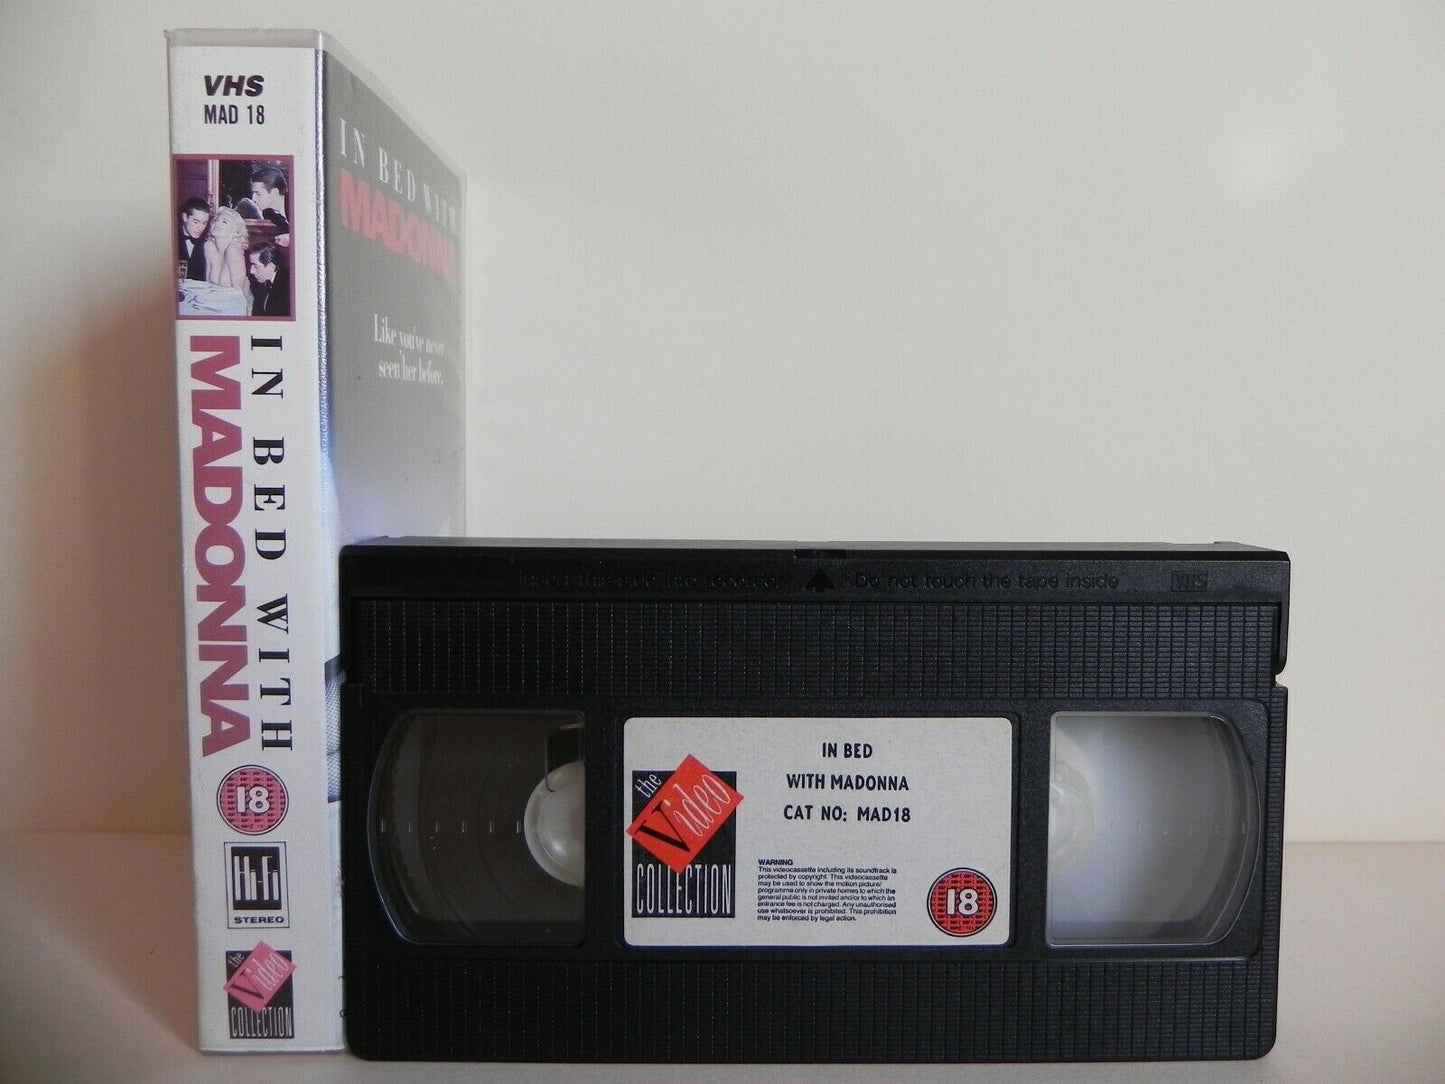 In Bed With Madonna - Hi-Fi Stereo - Documentary - Concert Footage - Pal VHS-